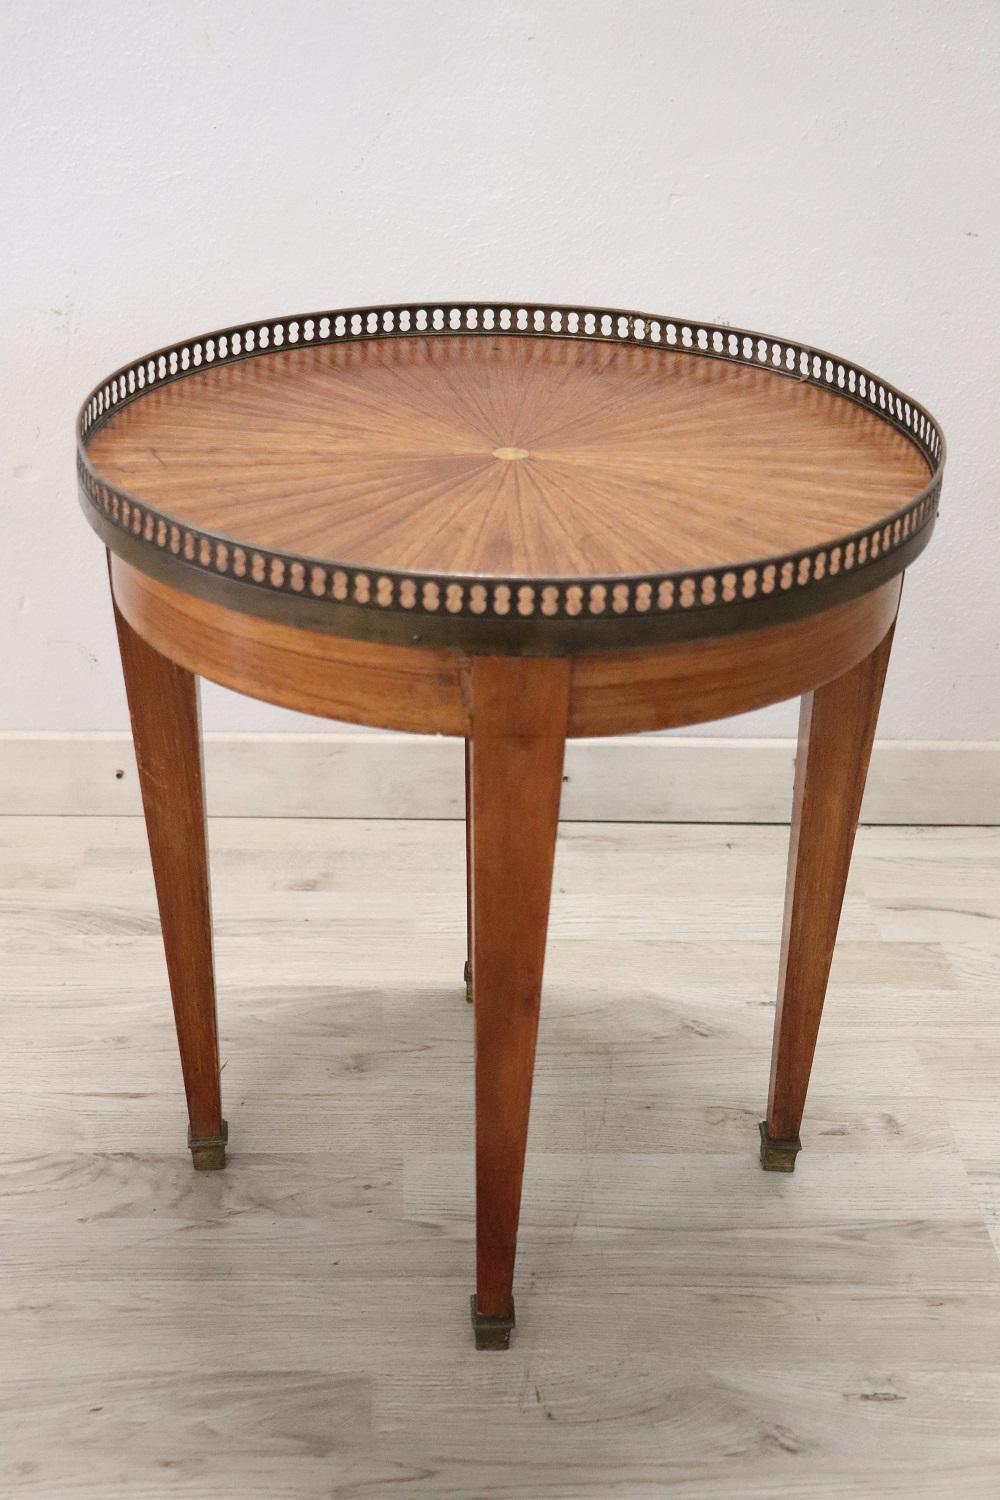 Rare and fine quality Italian Louis XVI style 1930s side table in walnut wood with with the decoration in wedges. The side table has a particular straight shape. Precious decorations in finely chiseled bronze. In vintage perfect conditions.